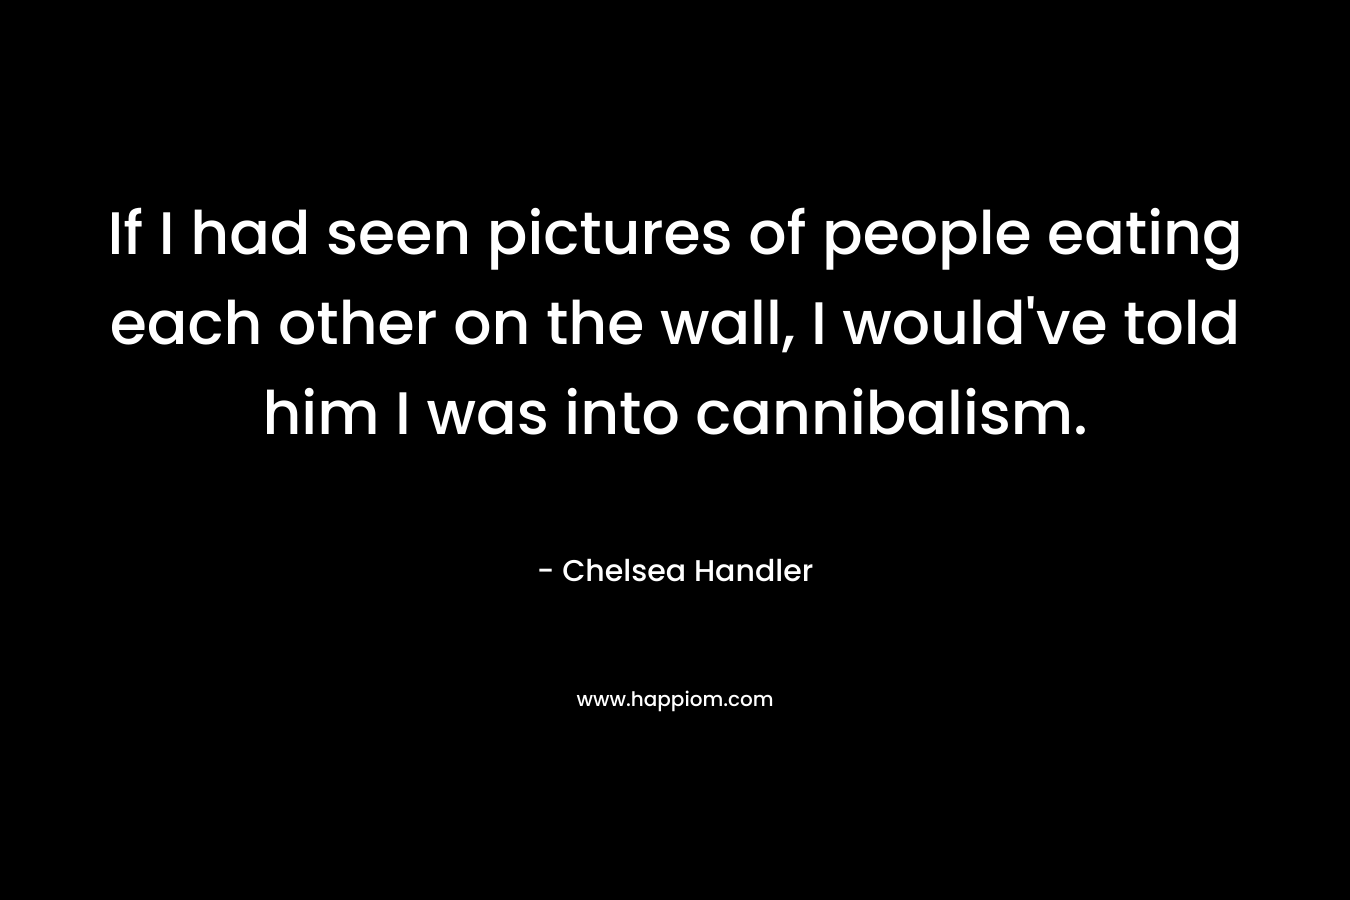 If I had seen pictures of people eating each other on the wall, I would’ve told him I was into cannibalism. – Chelsea Handler